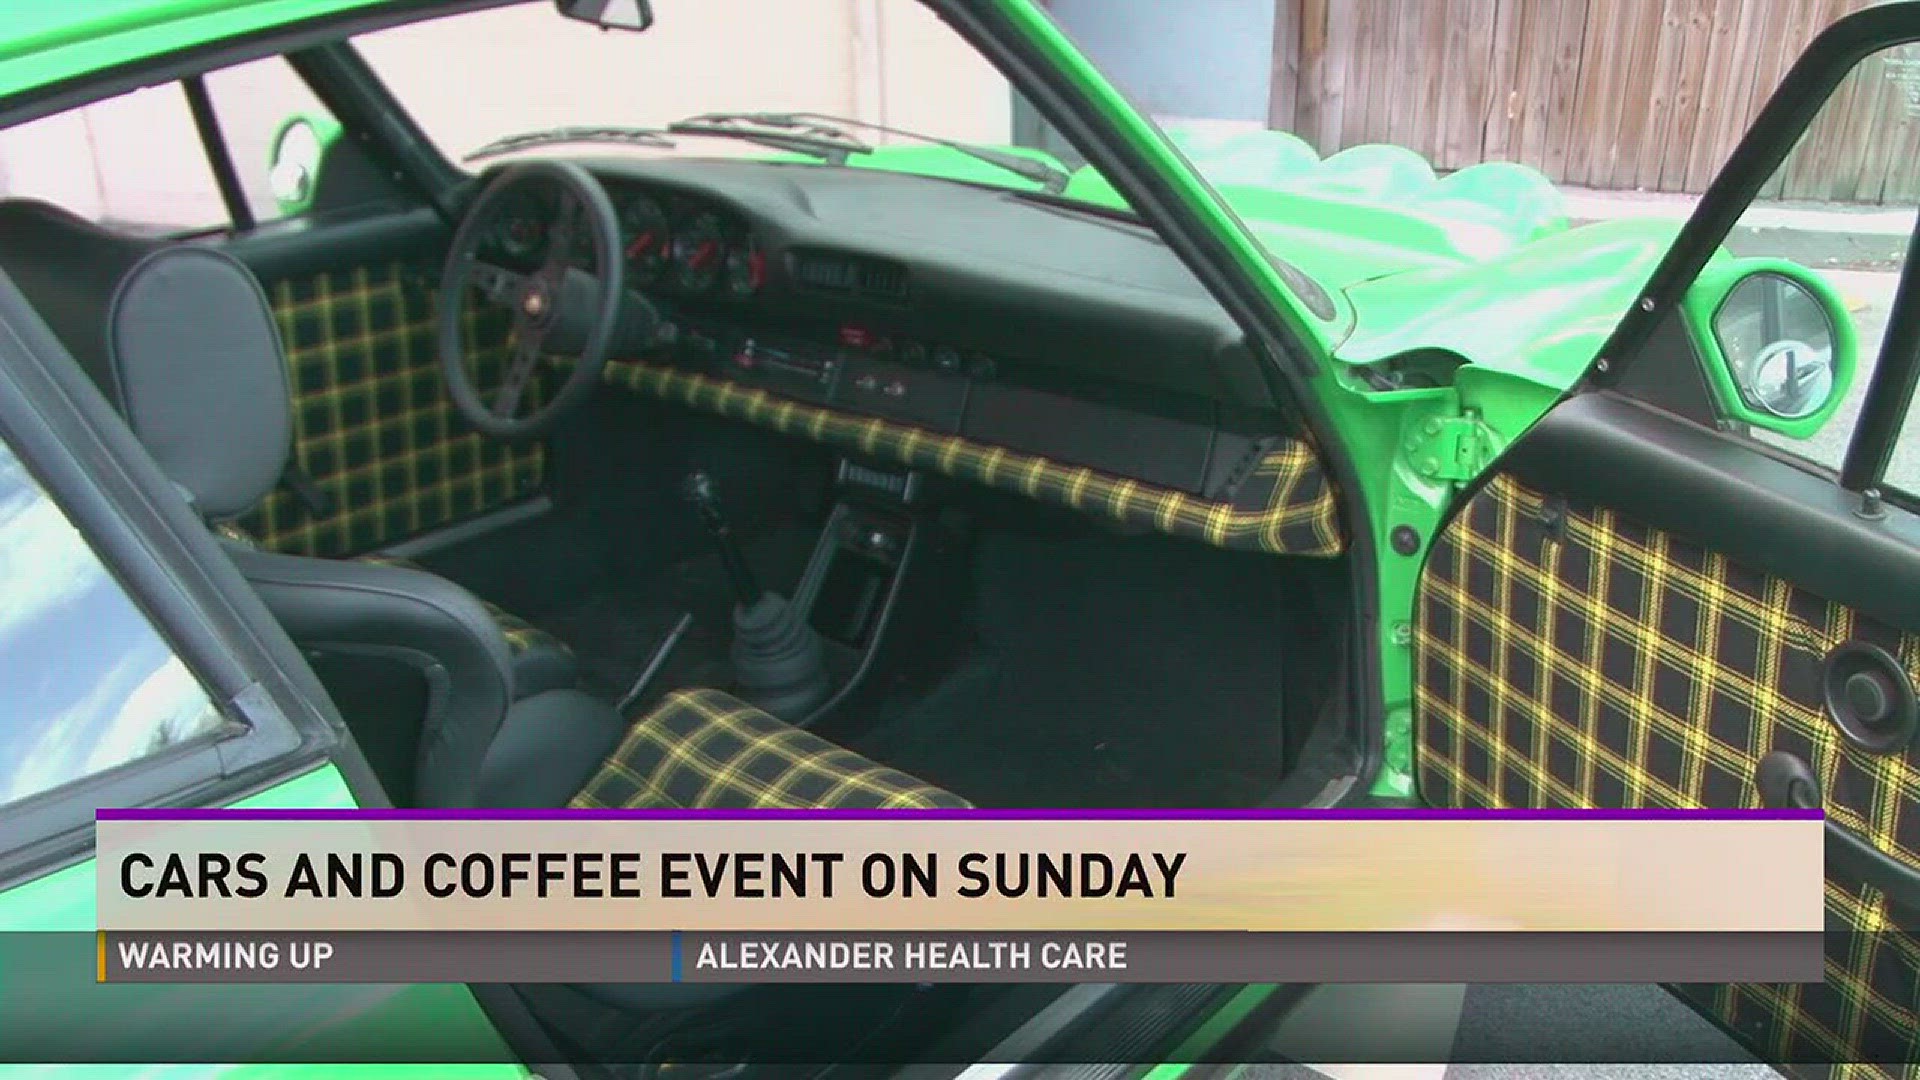 Bill Johnson from Harper Auto talks about the upcoming Cars and Coffee on Sunday